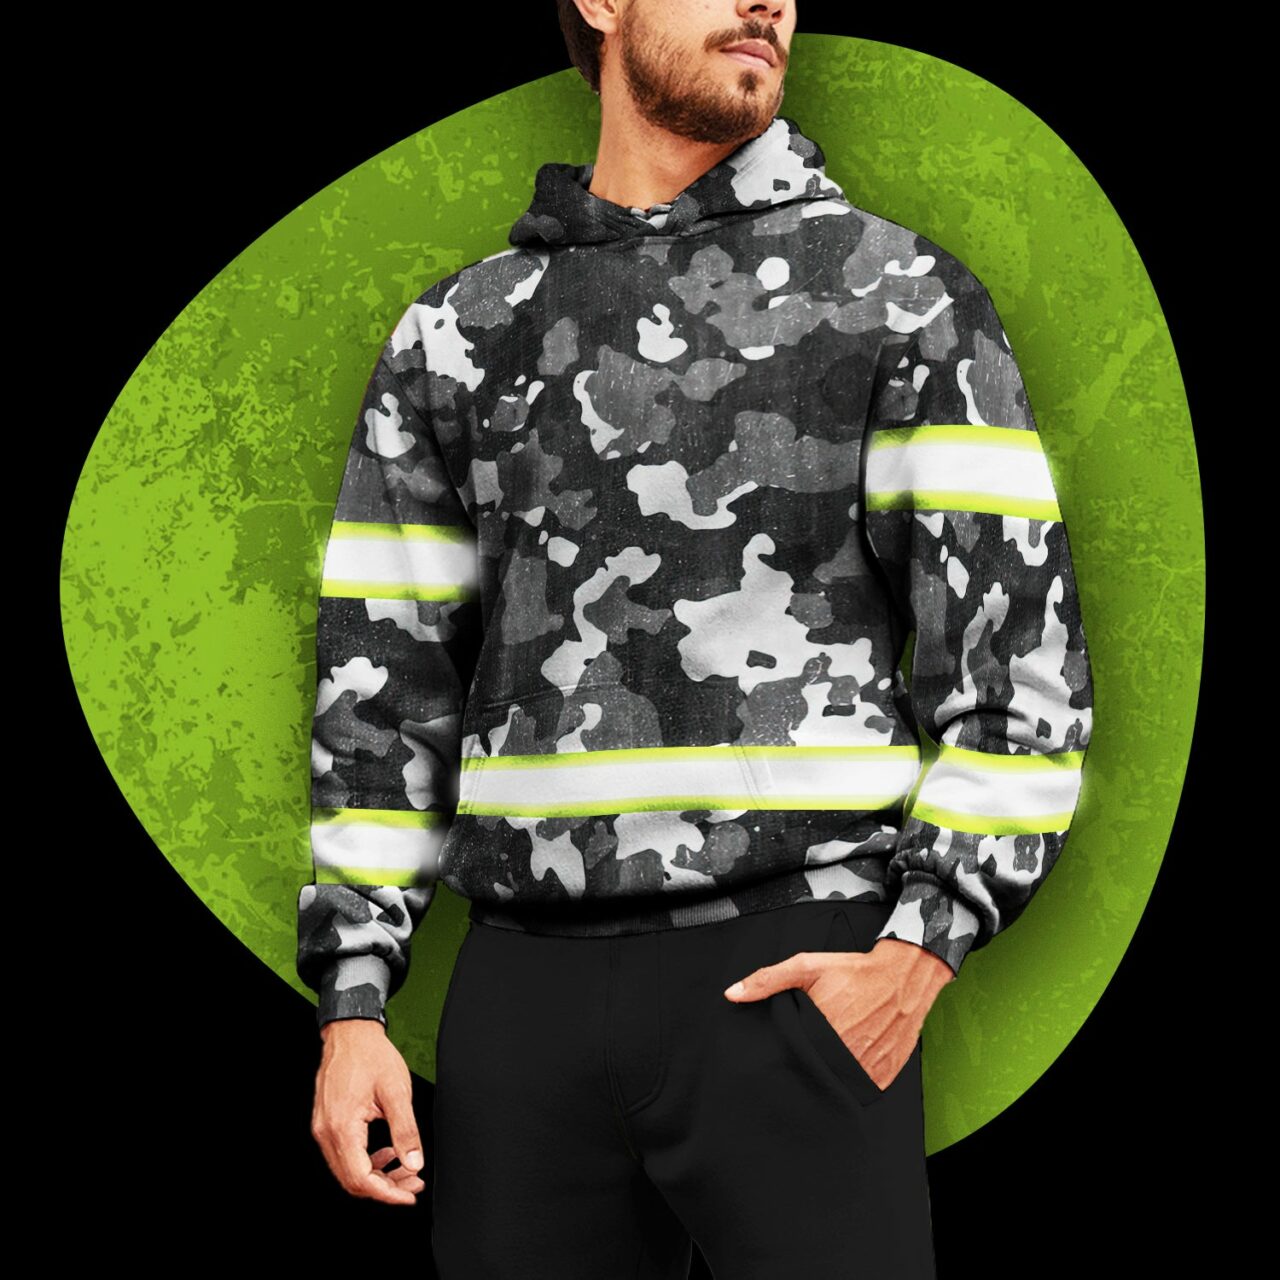 https://hiviscustom.com/wp-content/uploads/2022/06/hi-vis-hoodie-reflective-camo-fishing-outdoor-safety-for-fisherman-mc-1-scaled.jpg